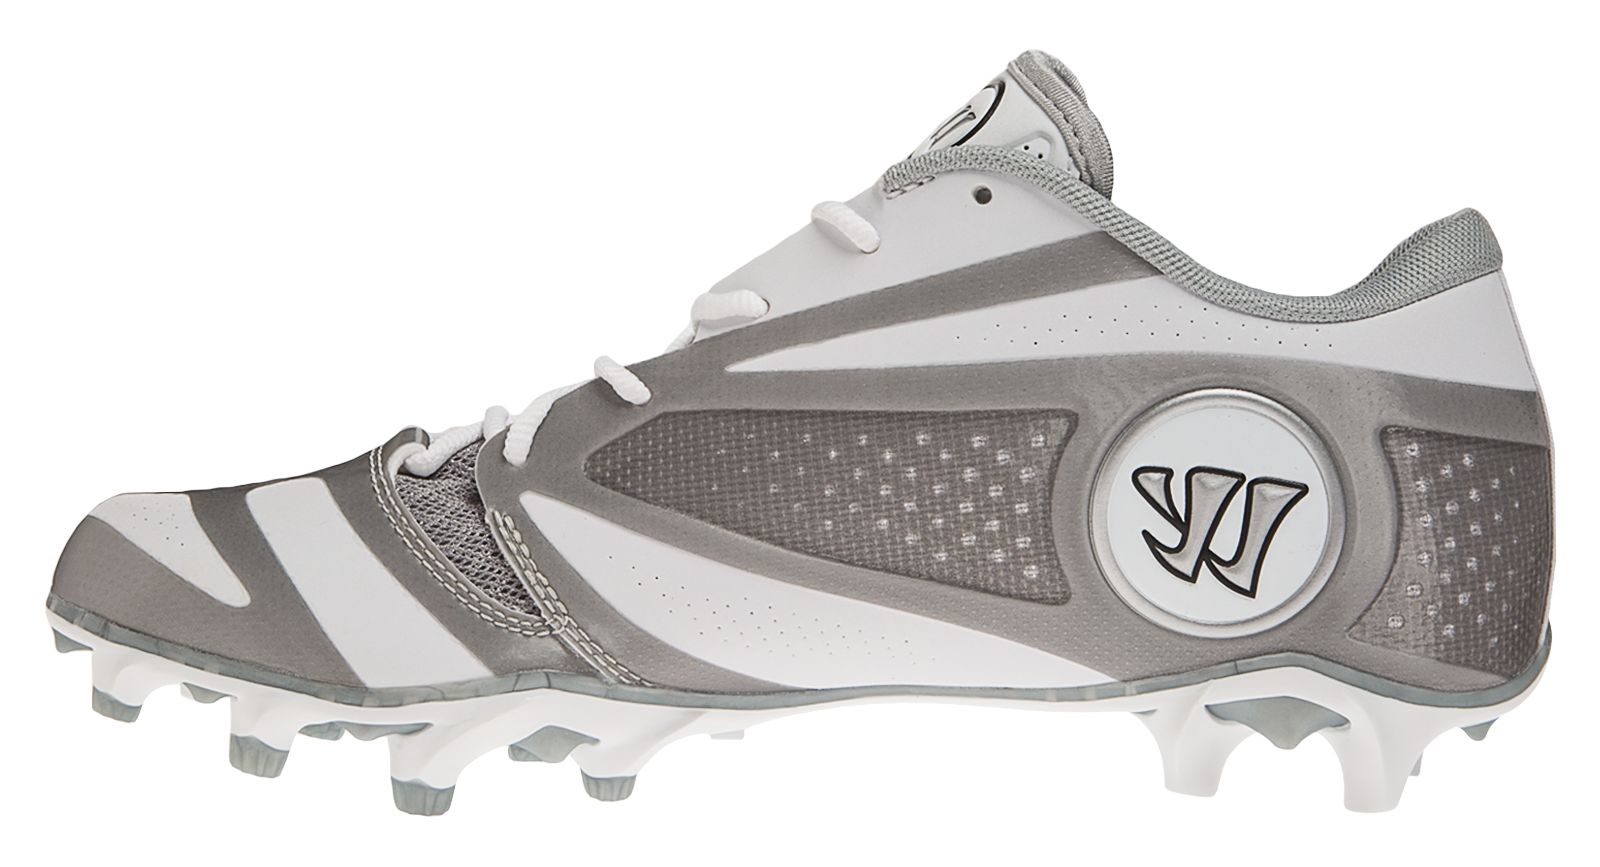 Burn 7.0 Low Cleat, White with Silver image number 1